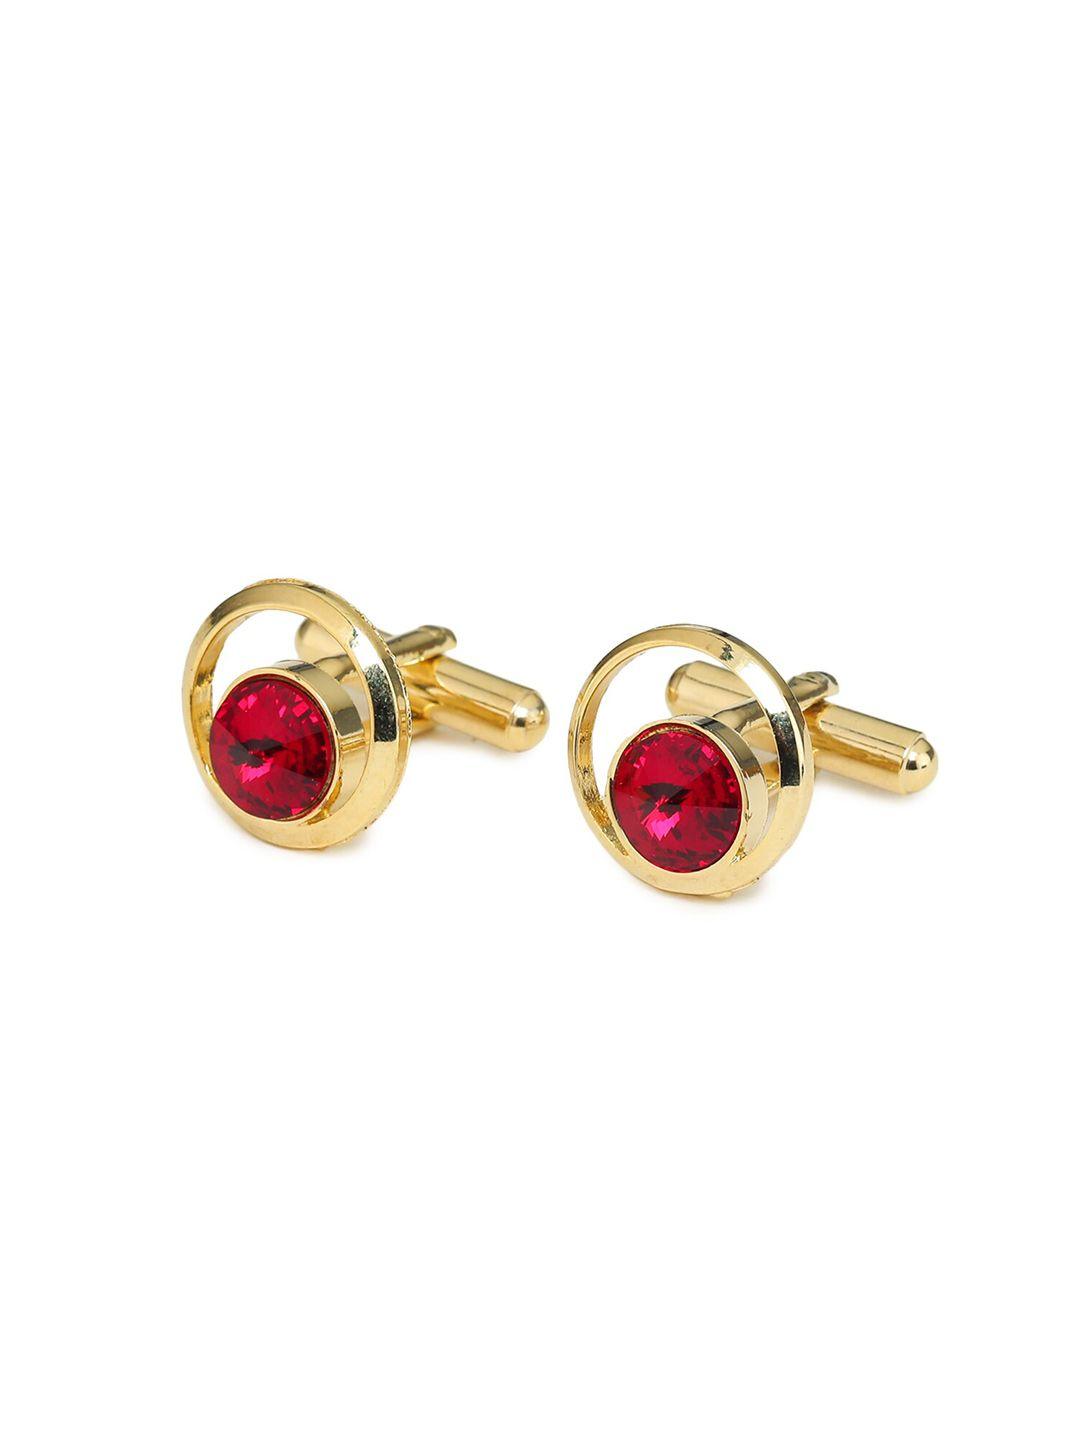 ellis gold plated red cufflink with tiepin set